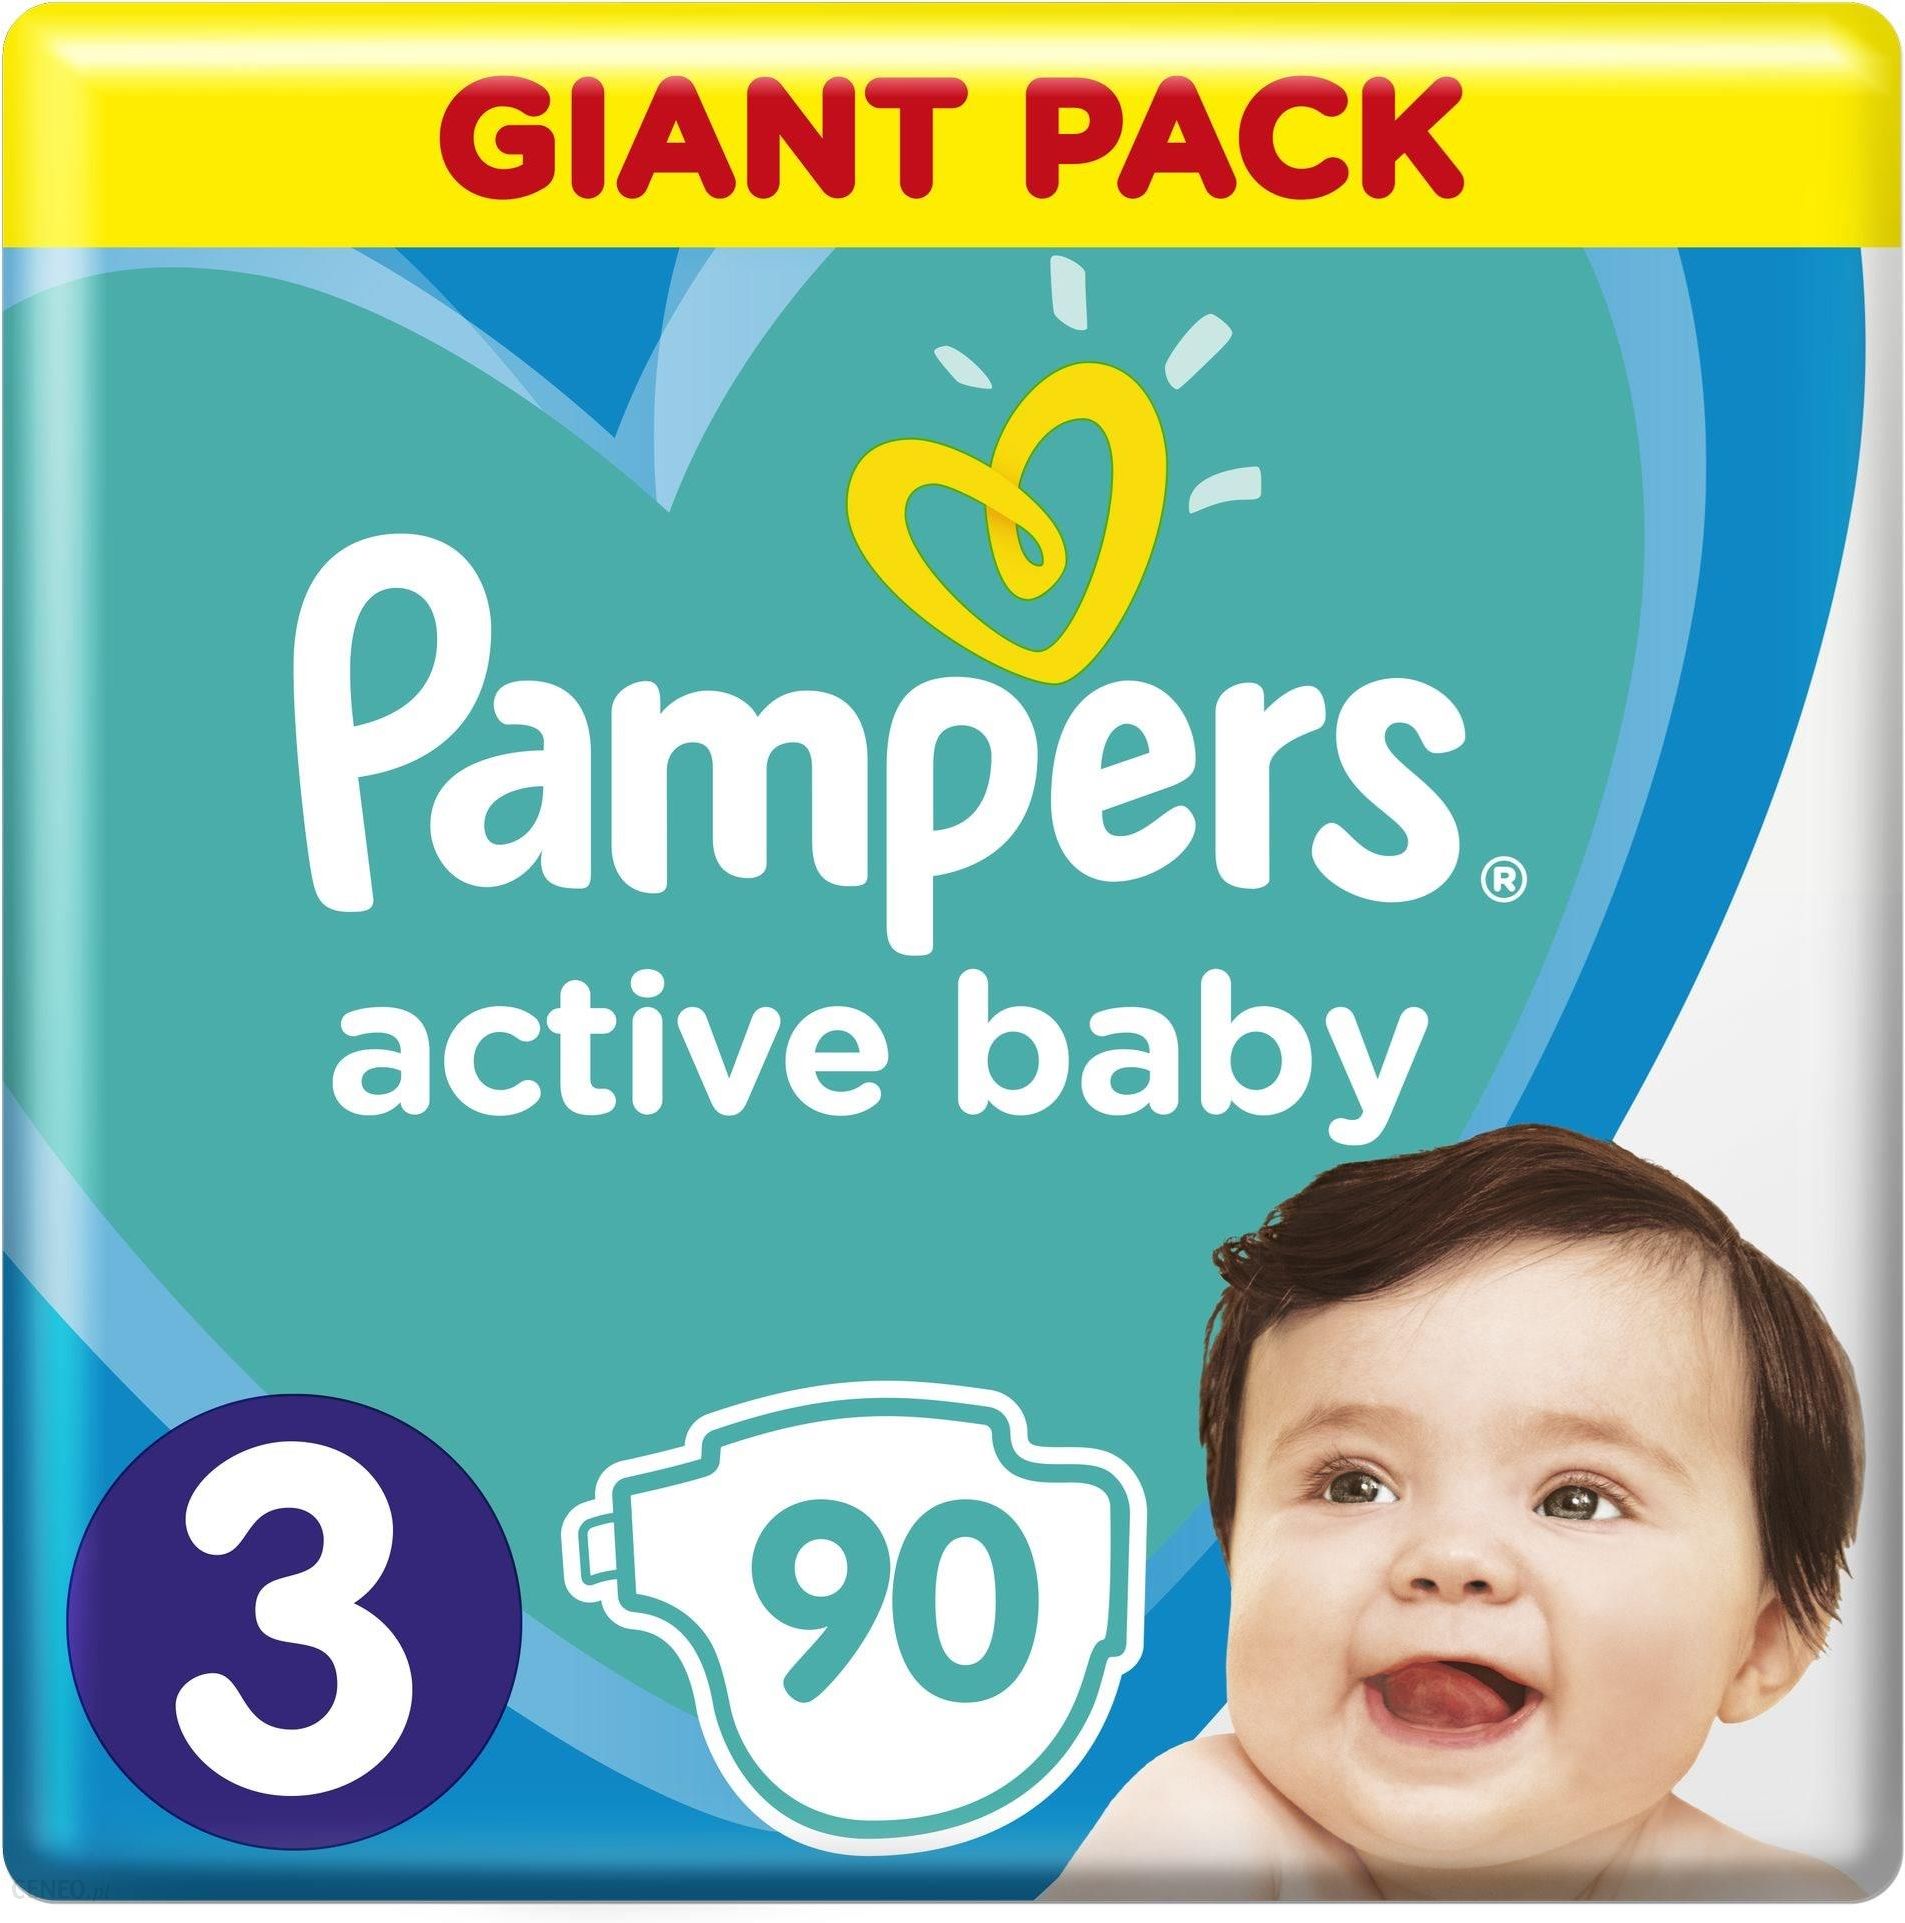 pampers rozmiar 3 active baby